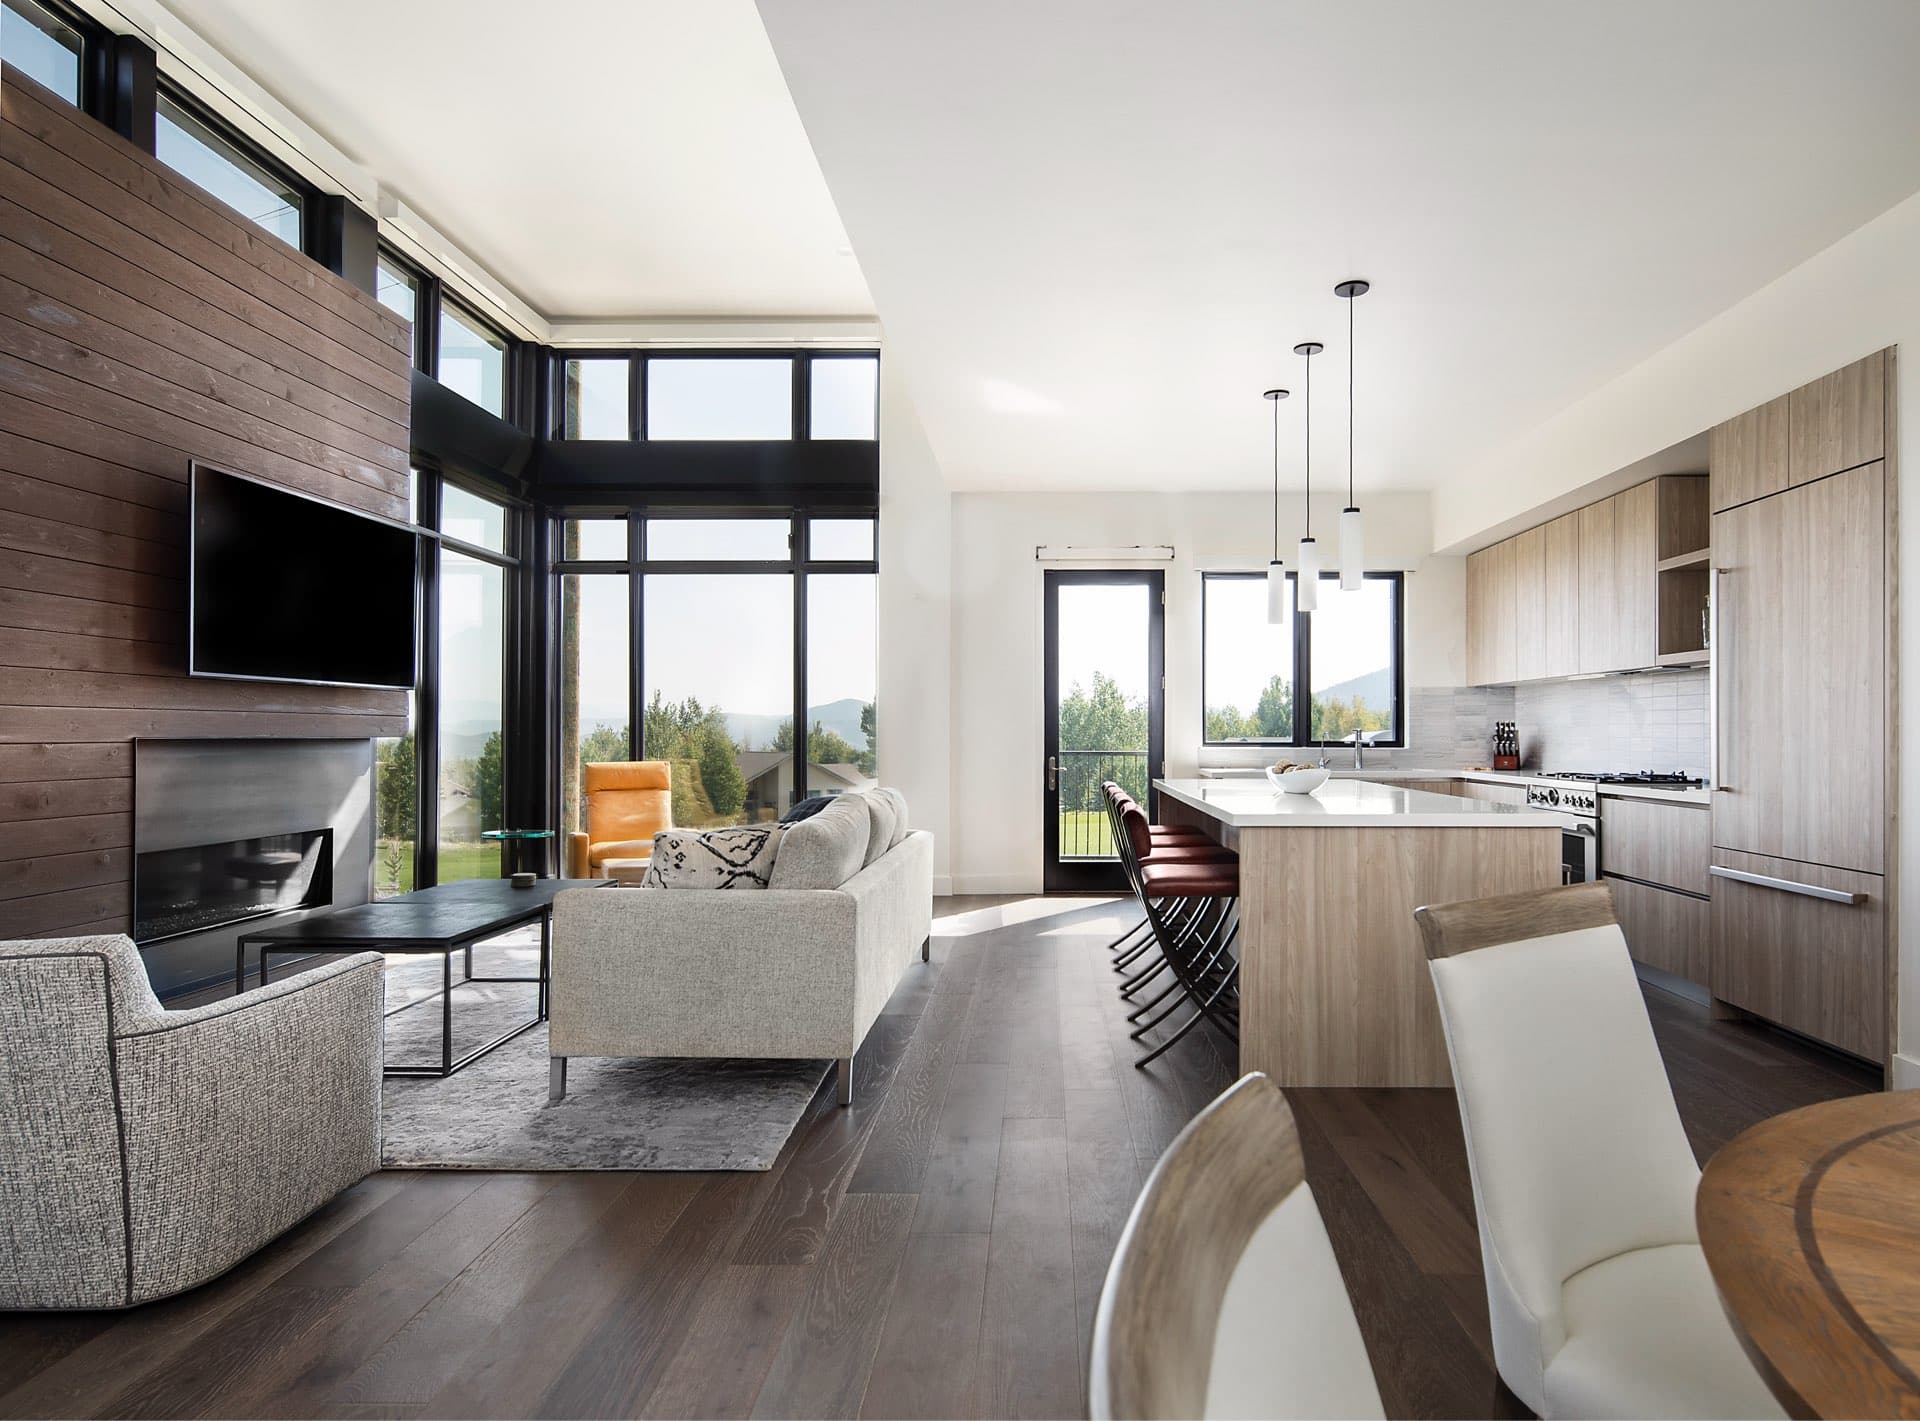 Viridian Townhomes living room and kitchen - architectural design by Elliott Workgroup